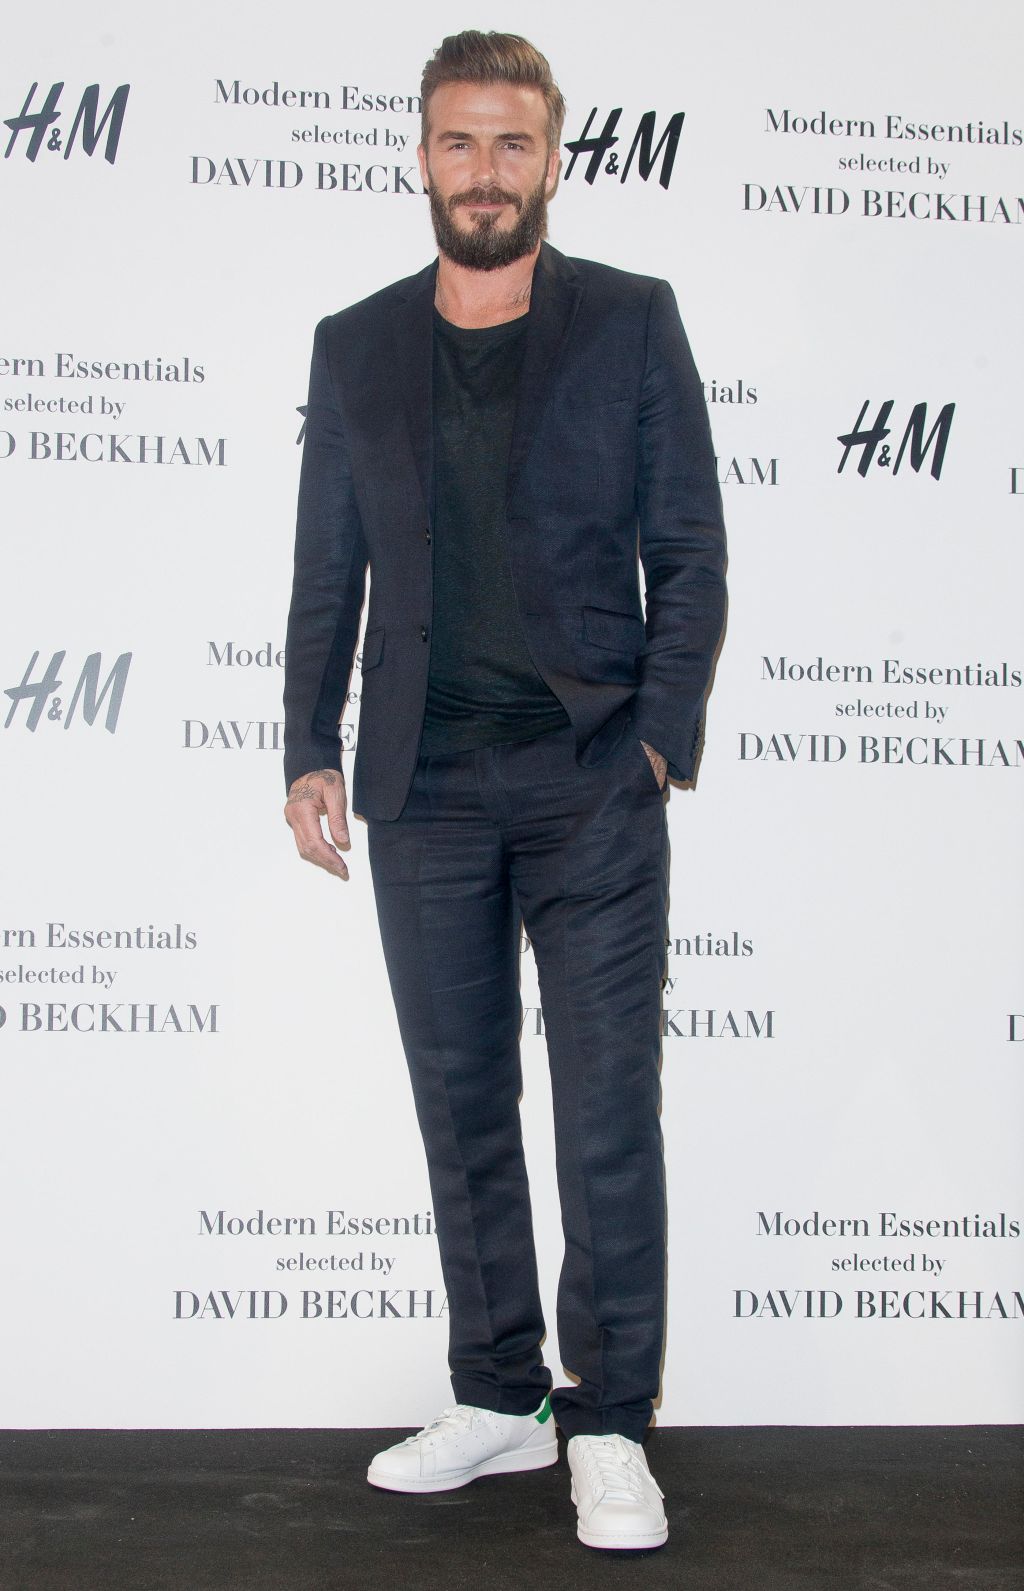 David Beckham Presents New H&M Collection in Madrid